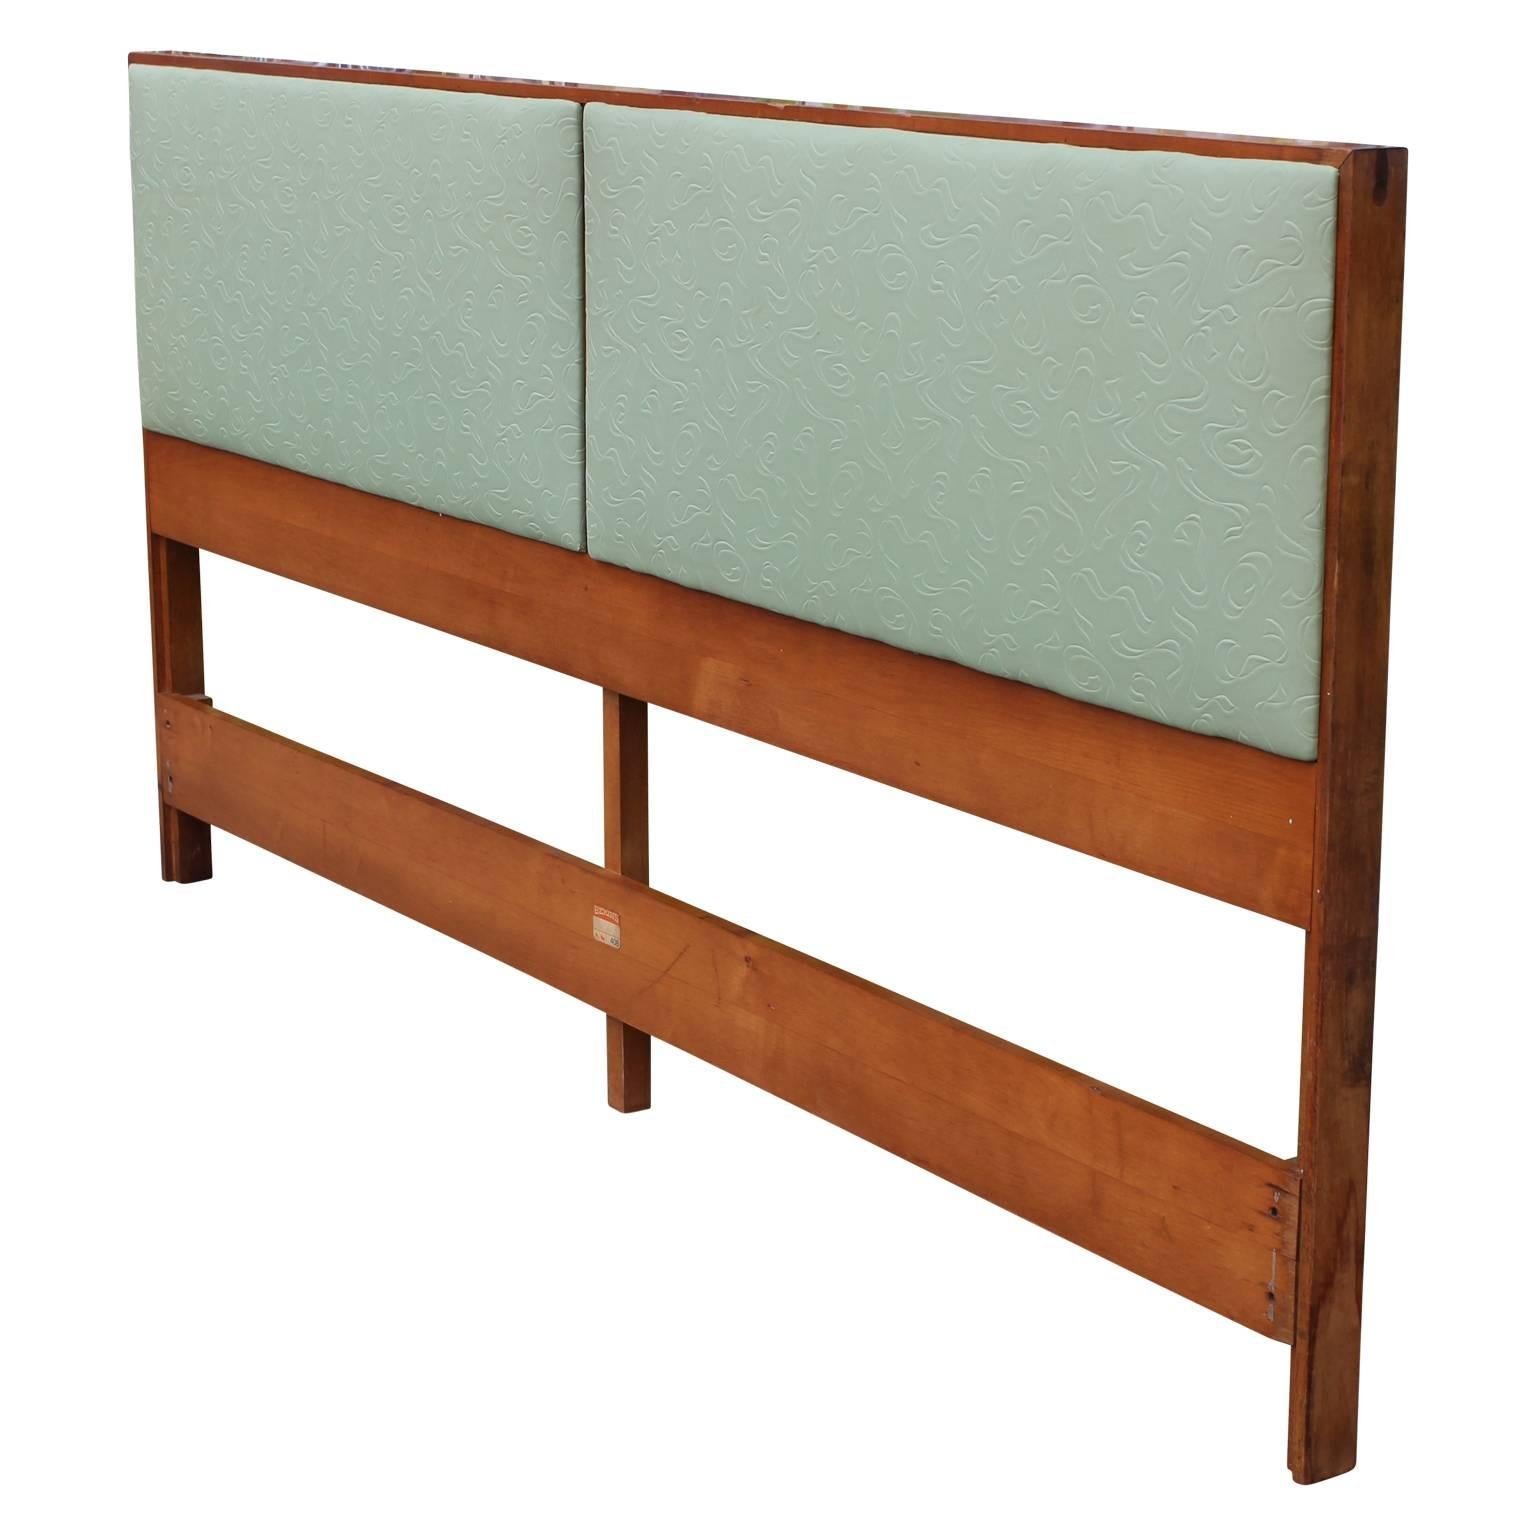 Modern maple king-size headboard by Paul McCobb for Planner Group with lovely mint green vinyl panelling.